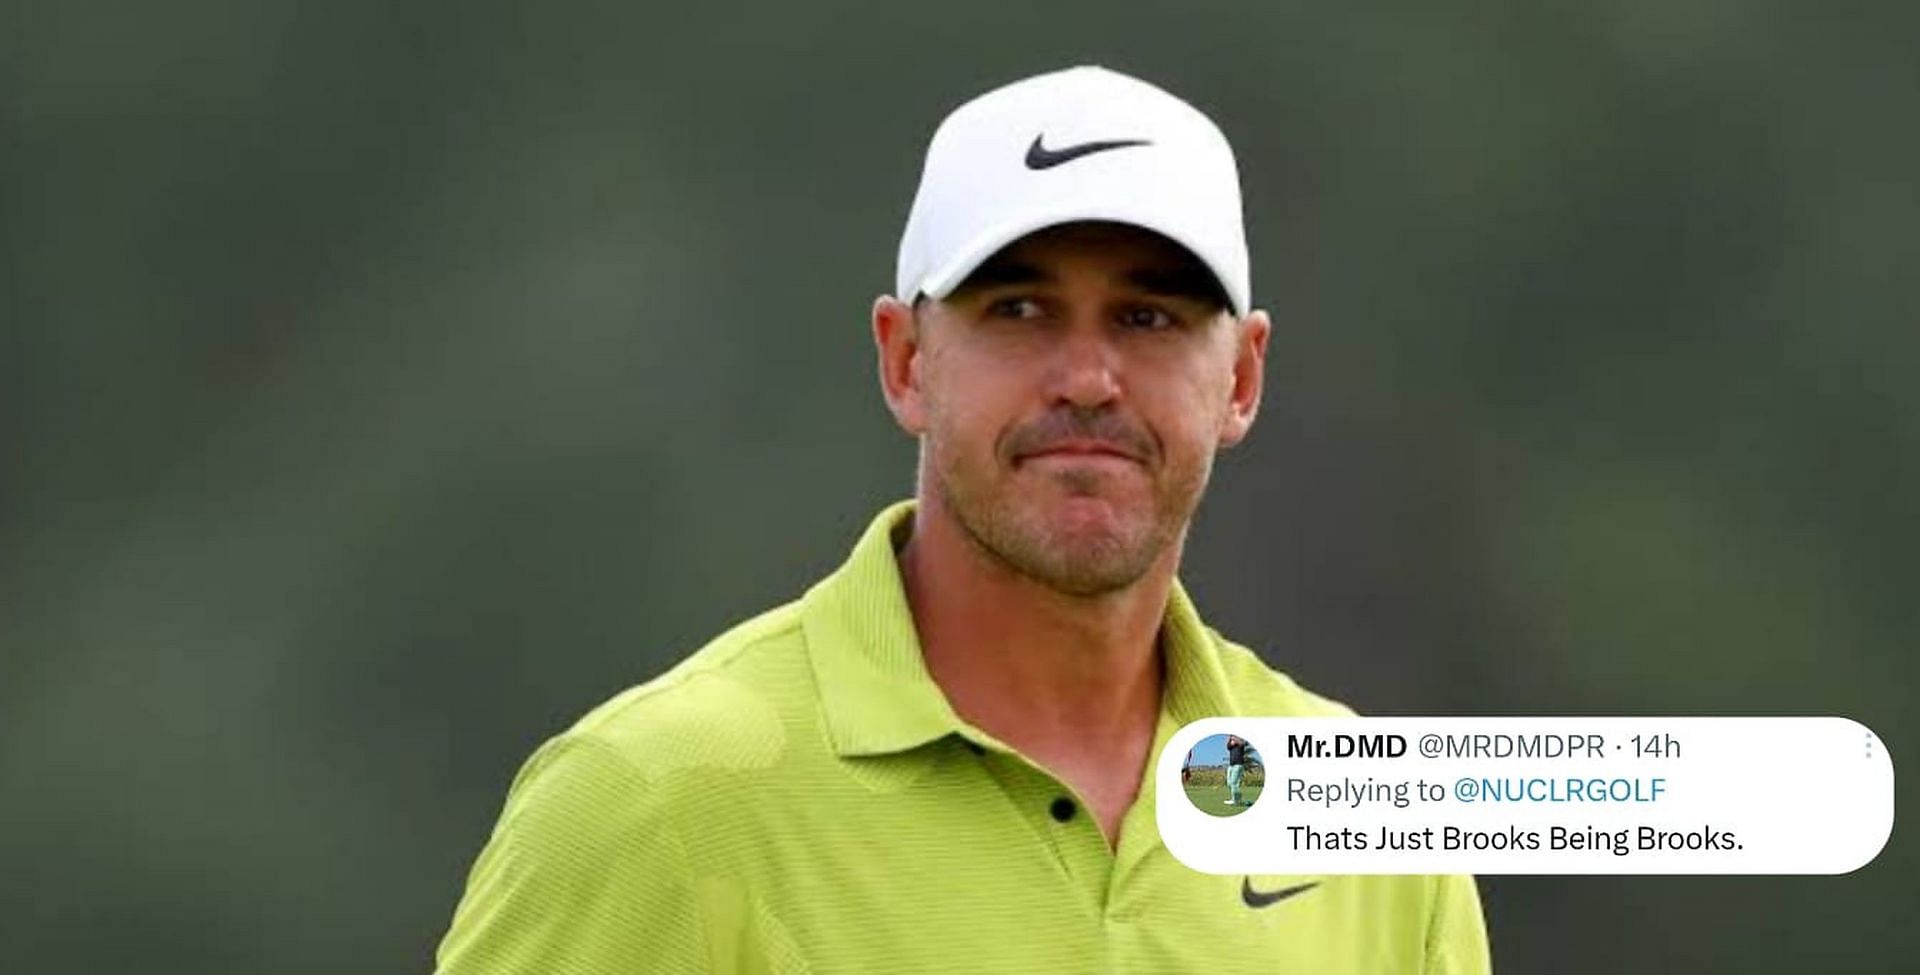 “That’s just Brooks being Brooks” – Fans react to Brooks Koepka’s ‘see ...